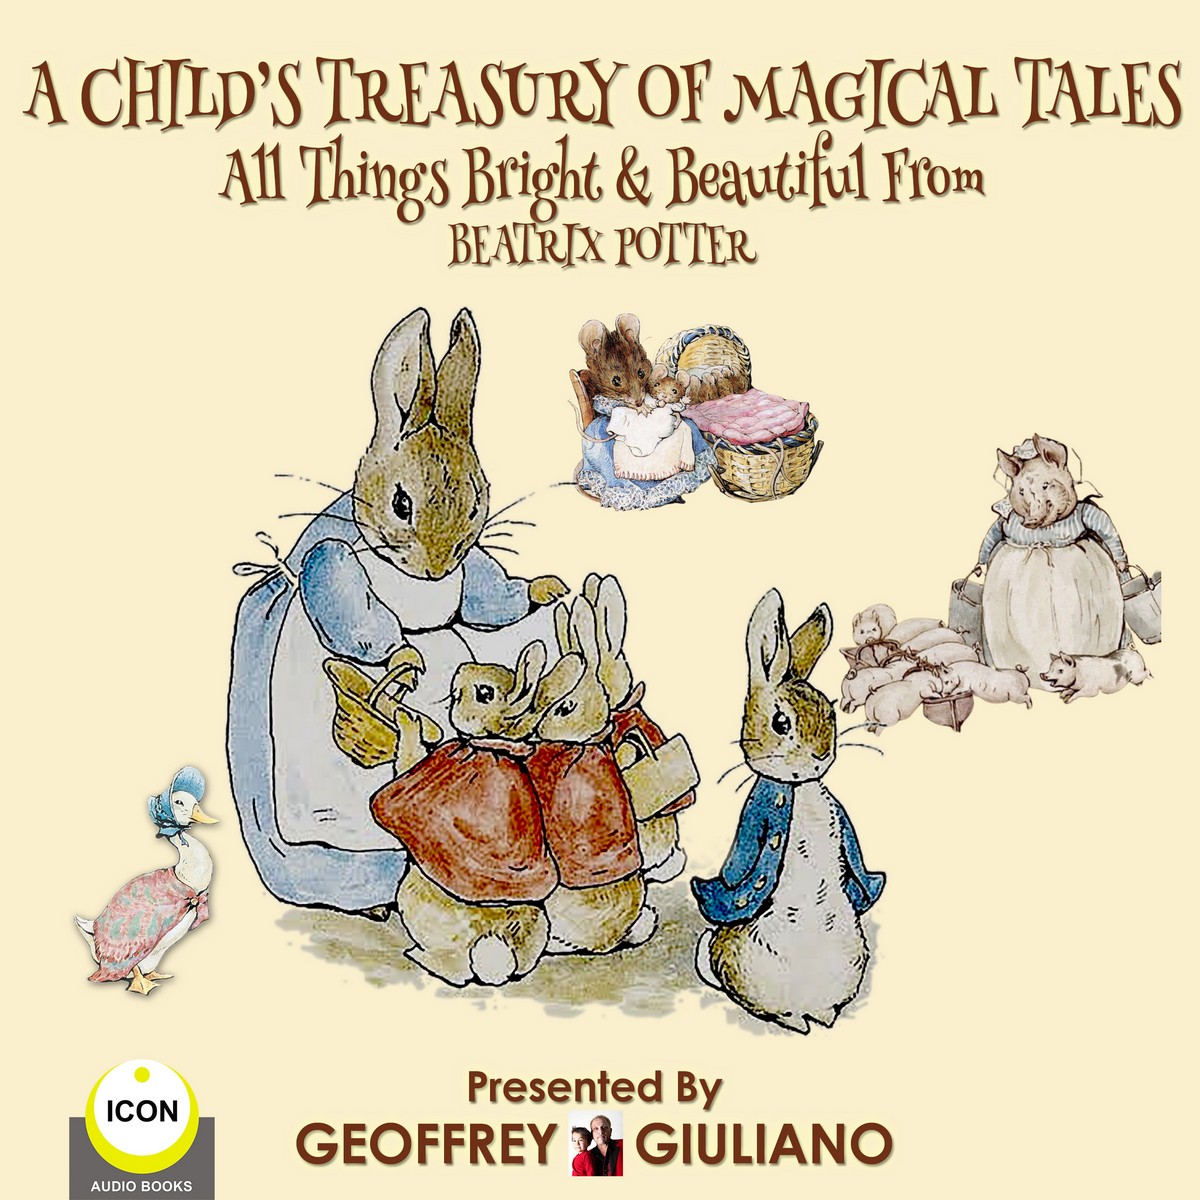 A Child’s Treasury Of Magical Tales All Things Bright & Beautiful From Beatrix Potter